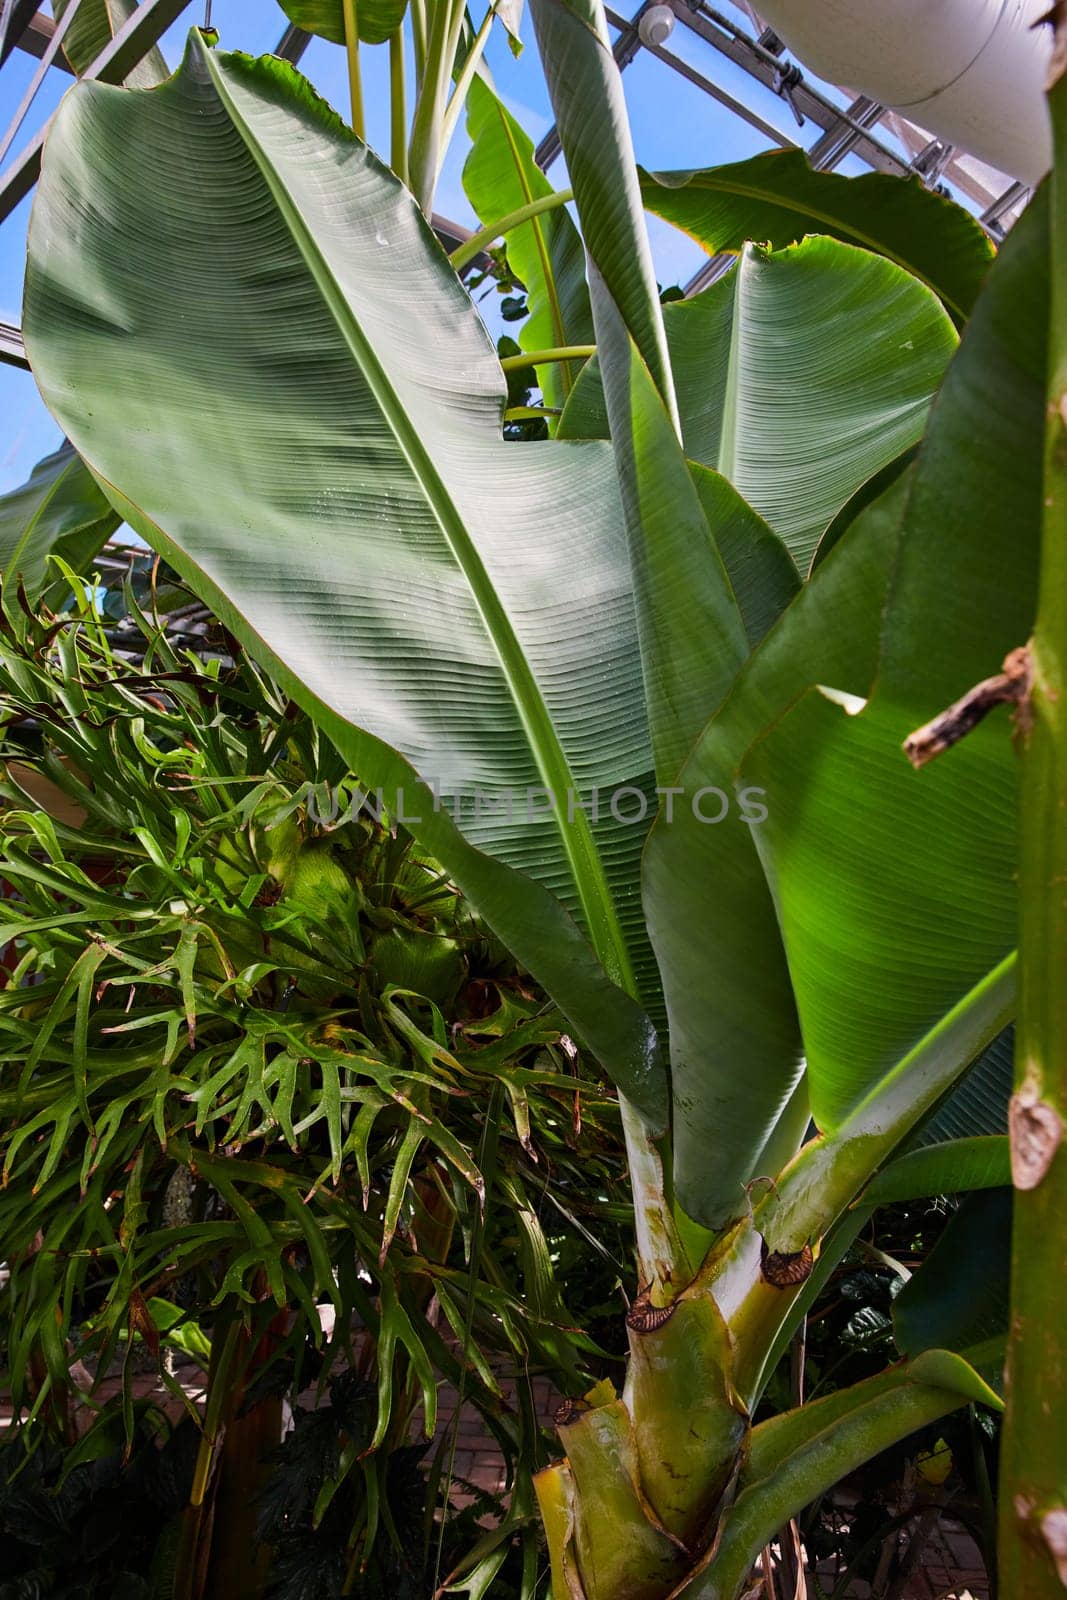 Lush Green Banana Leaves in Muncie Conservatory, Indiana 2023 - Vibrant Tropical Flora Under Clear Blue Sky